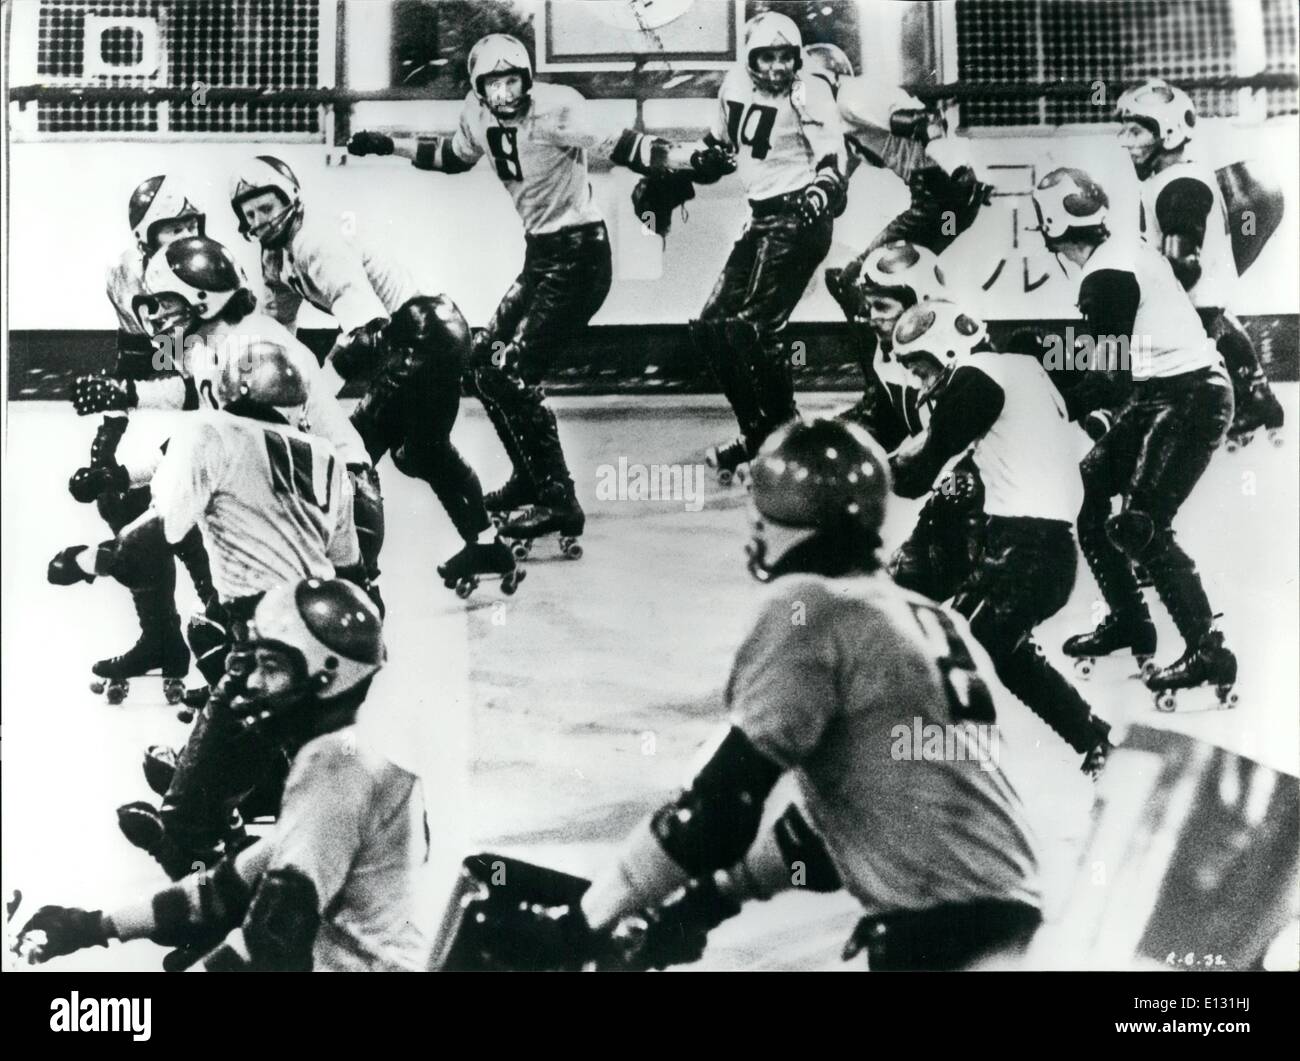 Feb. 26, 2012 - Plan To Make Rollerball A Reality: A United States consortium is said to have offered one-million dollars for the world-wide licence to make ''Rollerball' into a reality. This will meet with considerable opposition from Norman Jewison, the producer, director of the film, which has already grossed about nine-million pounds in two months showing in America. The film features a chilly blood-letting killer sport set in the year 2018. The game is on a circular track with a steel-coated ball and the skaters are equipped with special steel-studded gloves and helmet Stock Photo